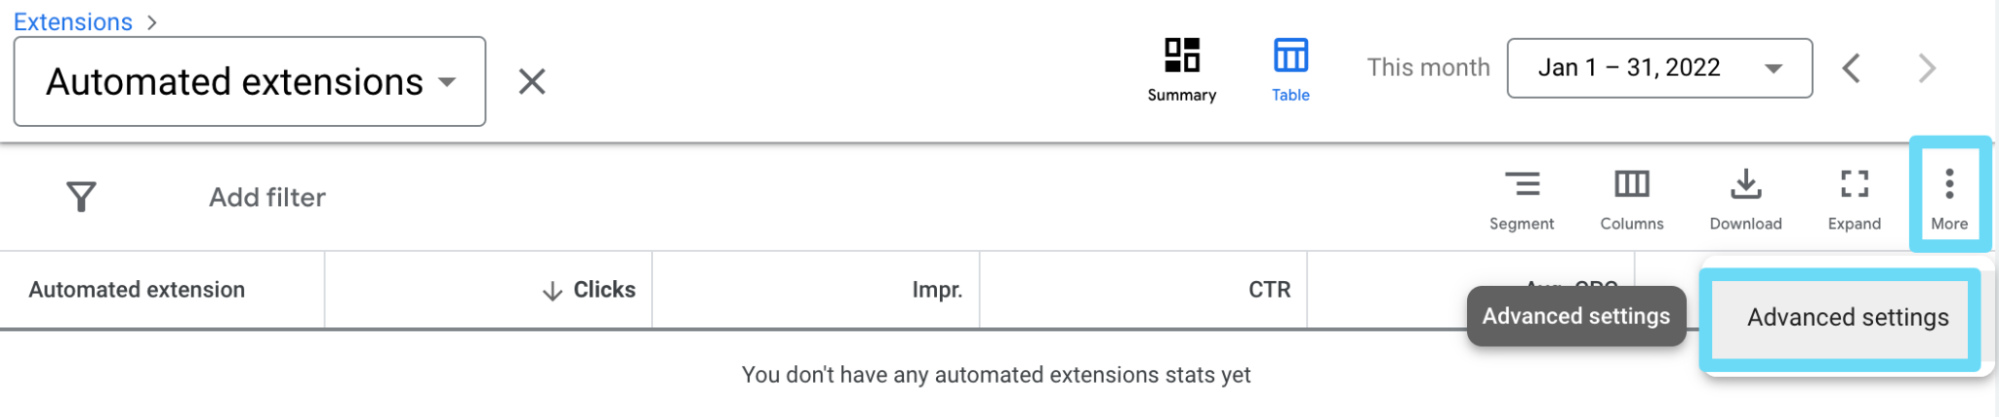 Automated extensions advanced settings